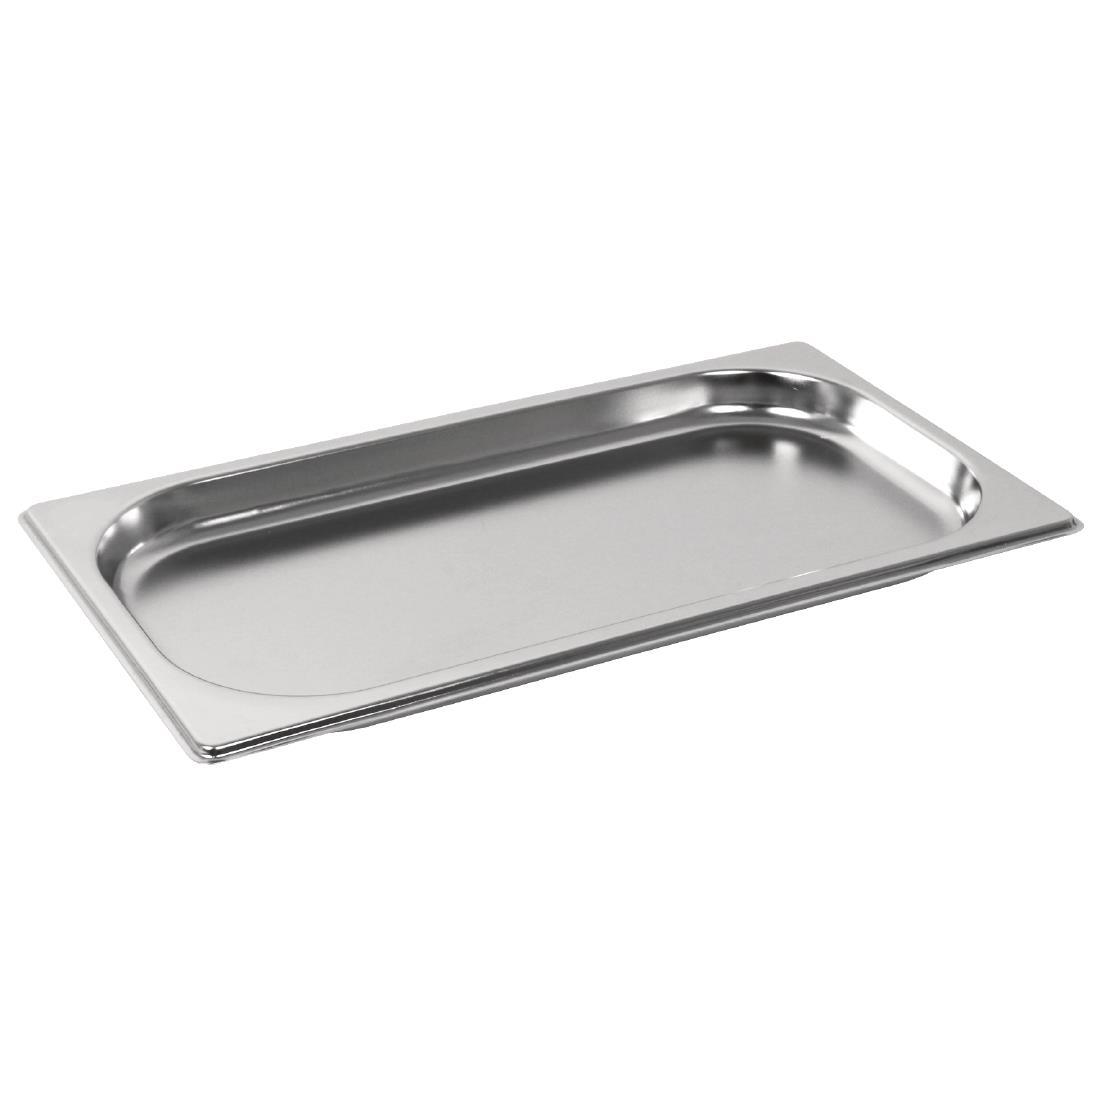 Vogue Stainless Steel 1/3 Gastronorm Pan 20mm - GM310  - 1